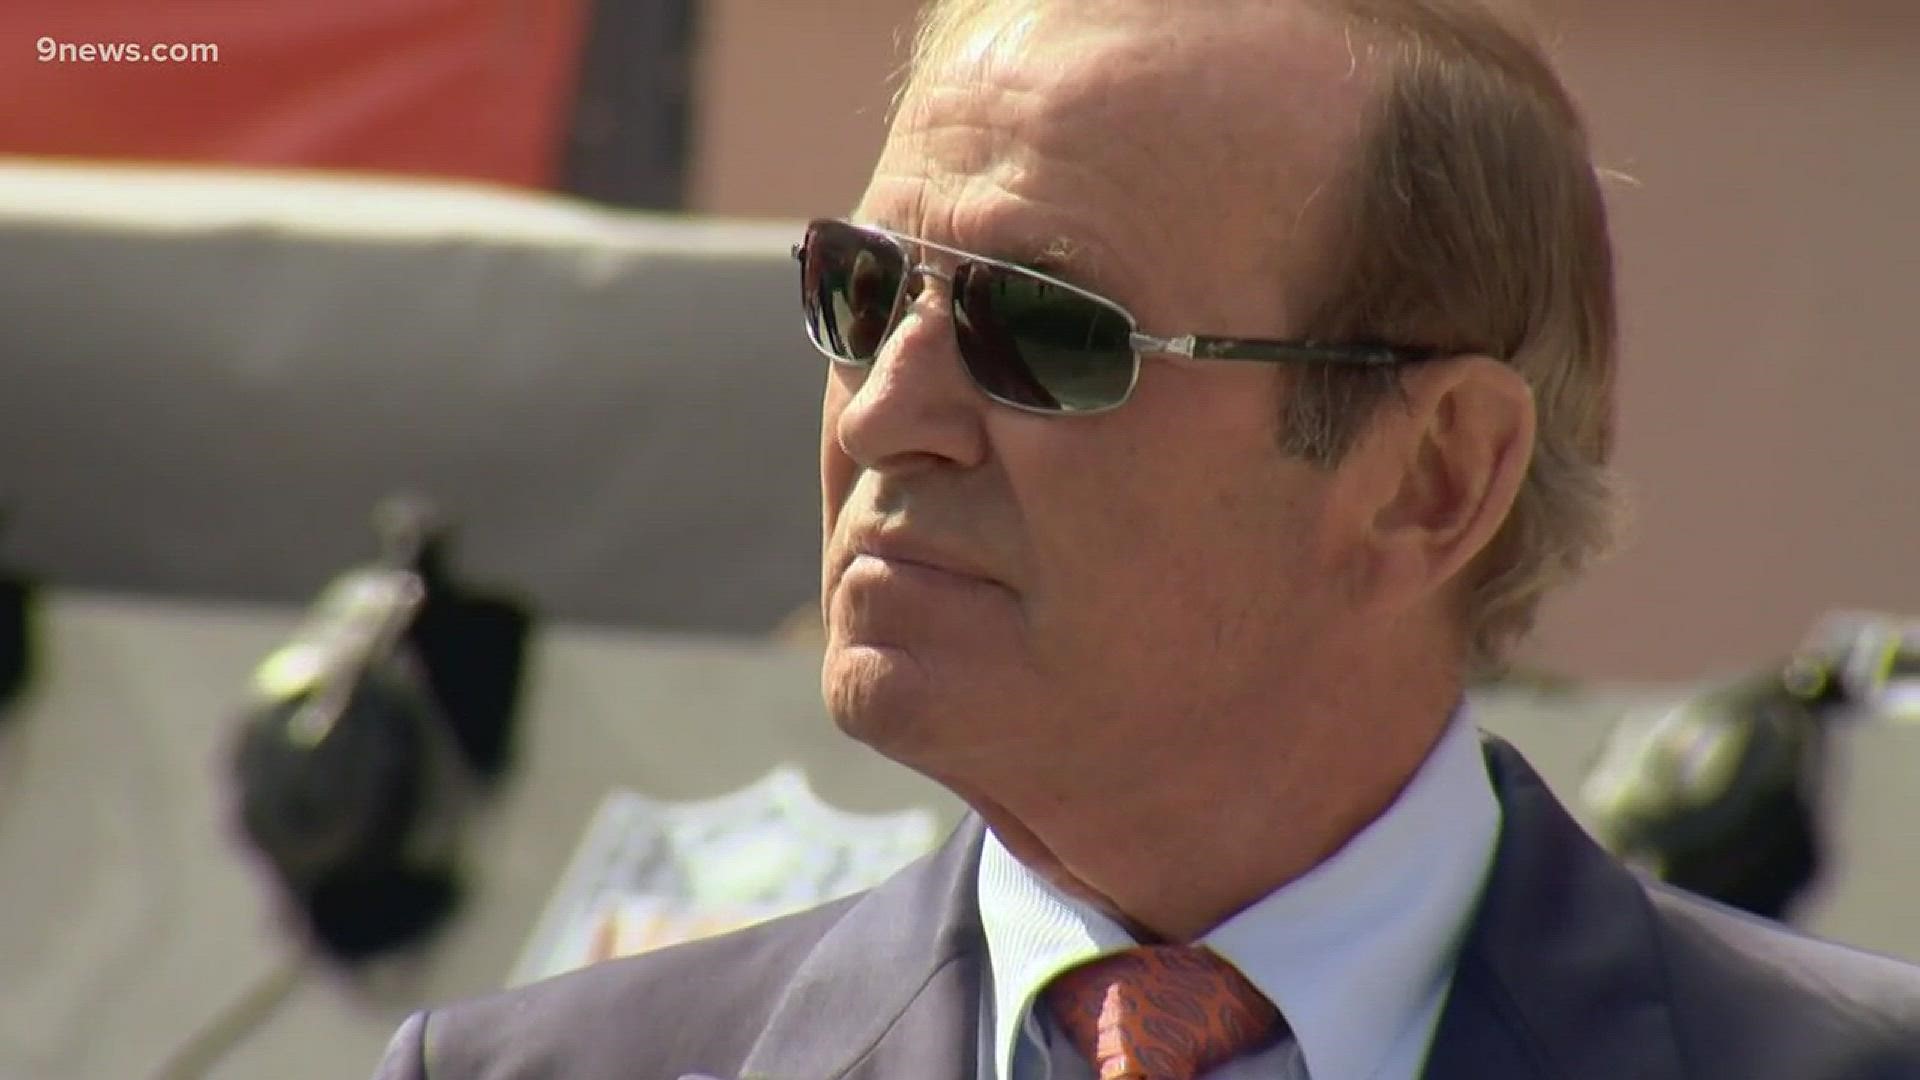 After being diagnosed with Alzheimer's, Pat Bowlen established a three-person trust to run the team and determine which of his children would succeed him as controlling owner. Two of his daughters want the job. Now, his wife Annabel Bowlen is moving in to intervene.